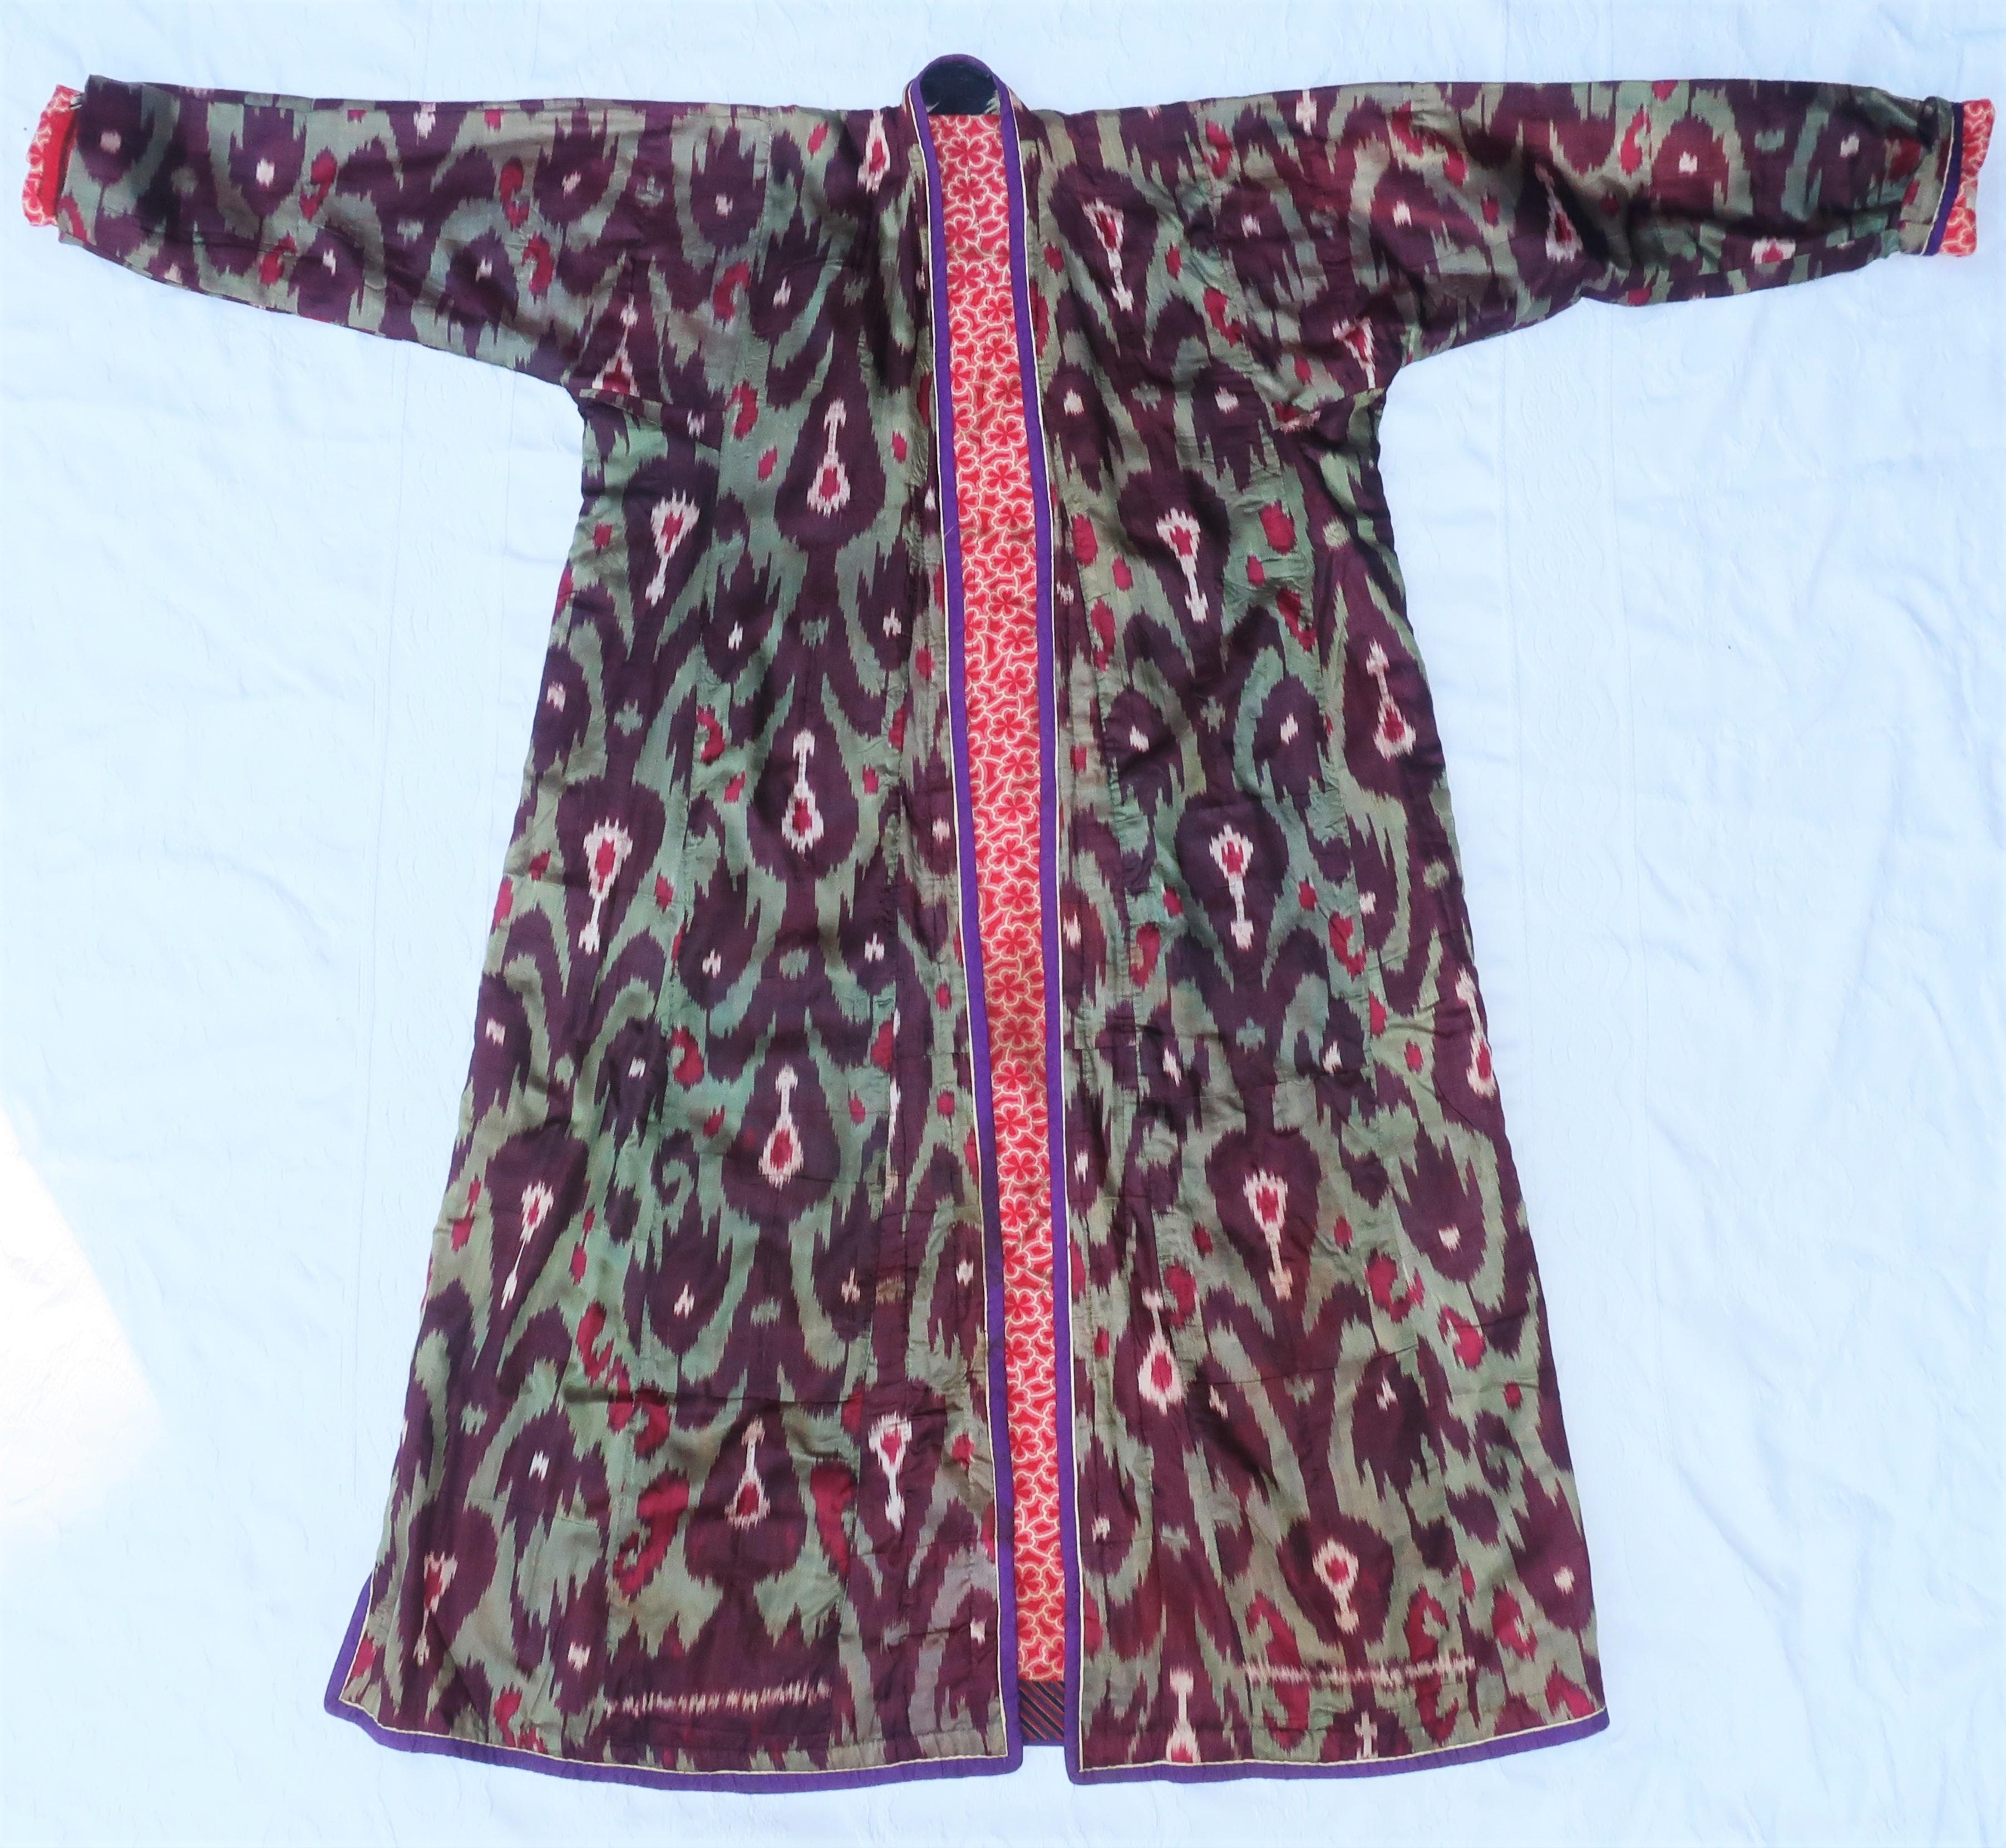 A beautiful late 19th Century silk robe from Central Asia (likely Uzbekistan region) in a traditional Ikat pattern displaying shades of purple, aubergine, red and green.  It is lined in a red and white cotton floral with banding in blue, red and